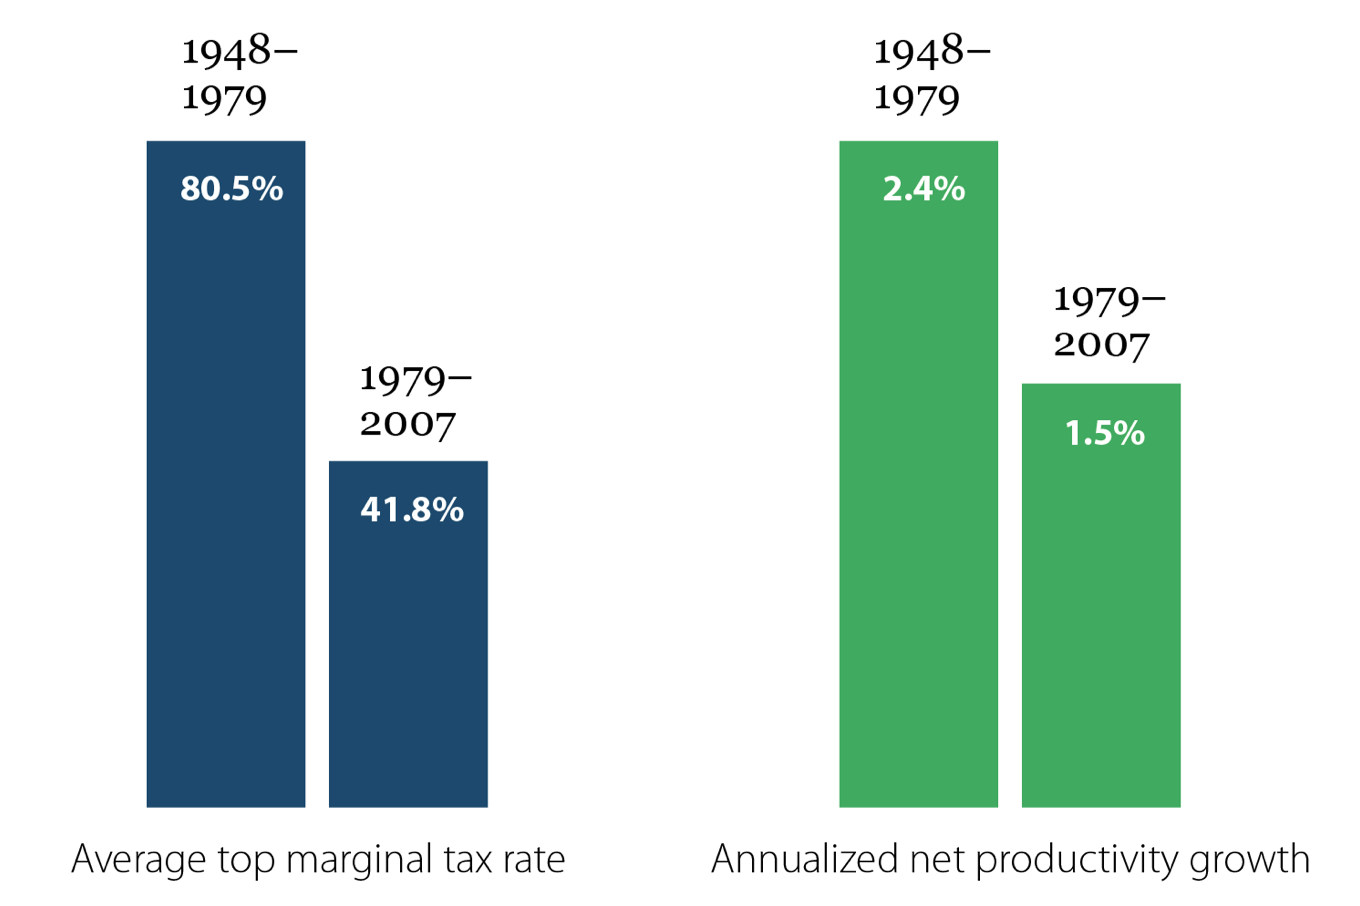 Tax Cuts Didn’t Lead to Faster Growth: Average top marginal tax rate and annualized productivity growth, 1948–1979 and 1979–2007